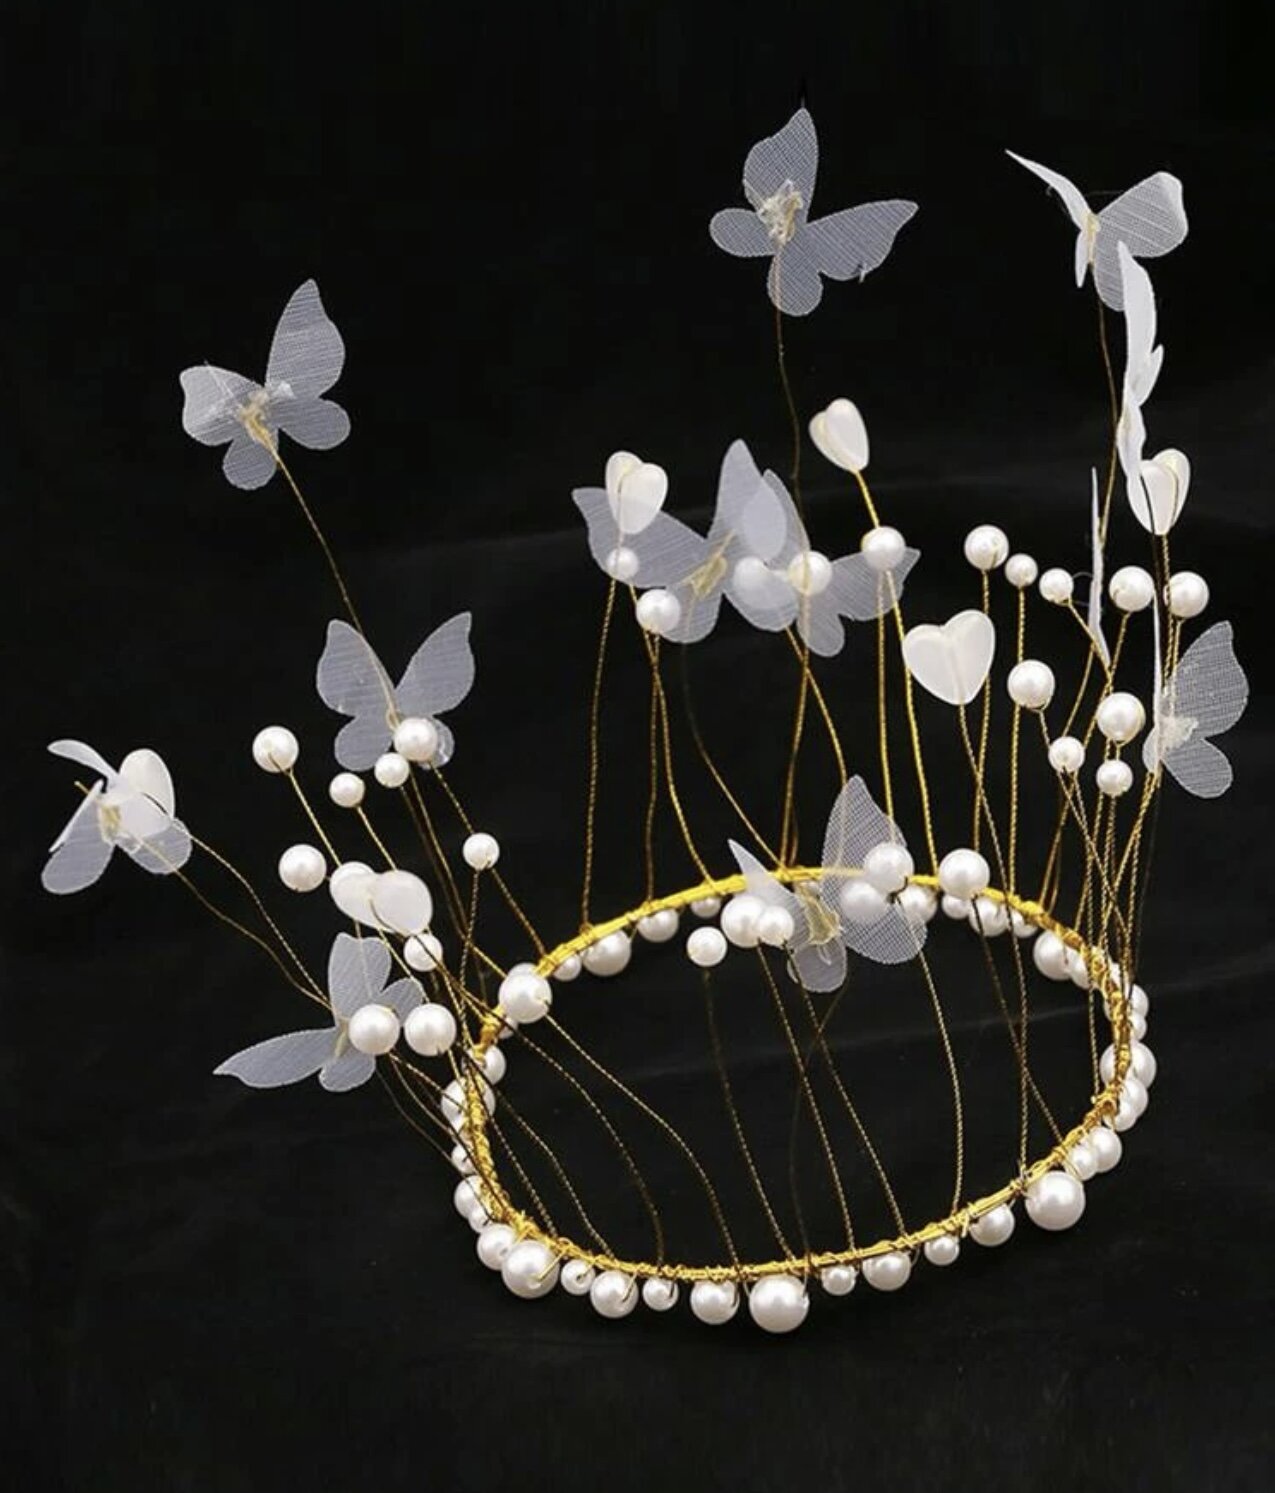 Butterflies and Pearl Gold Crown Cake Topper